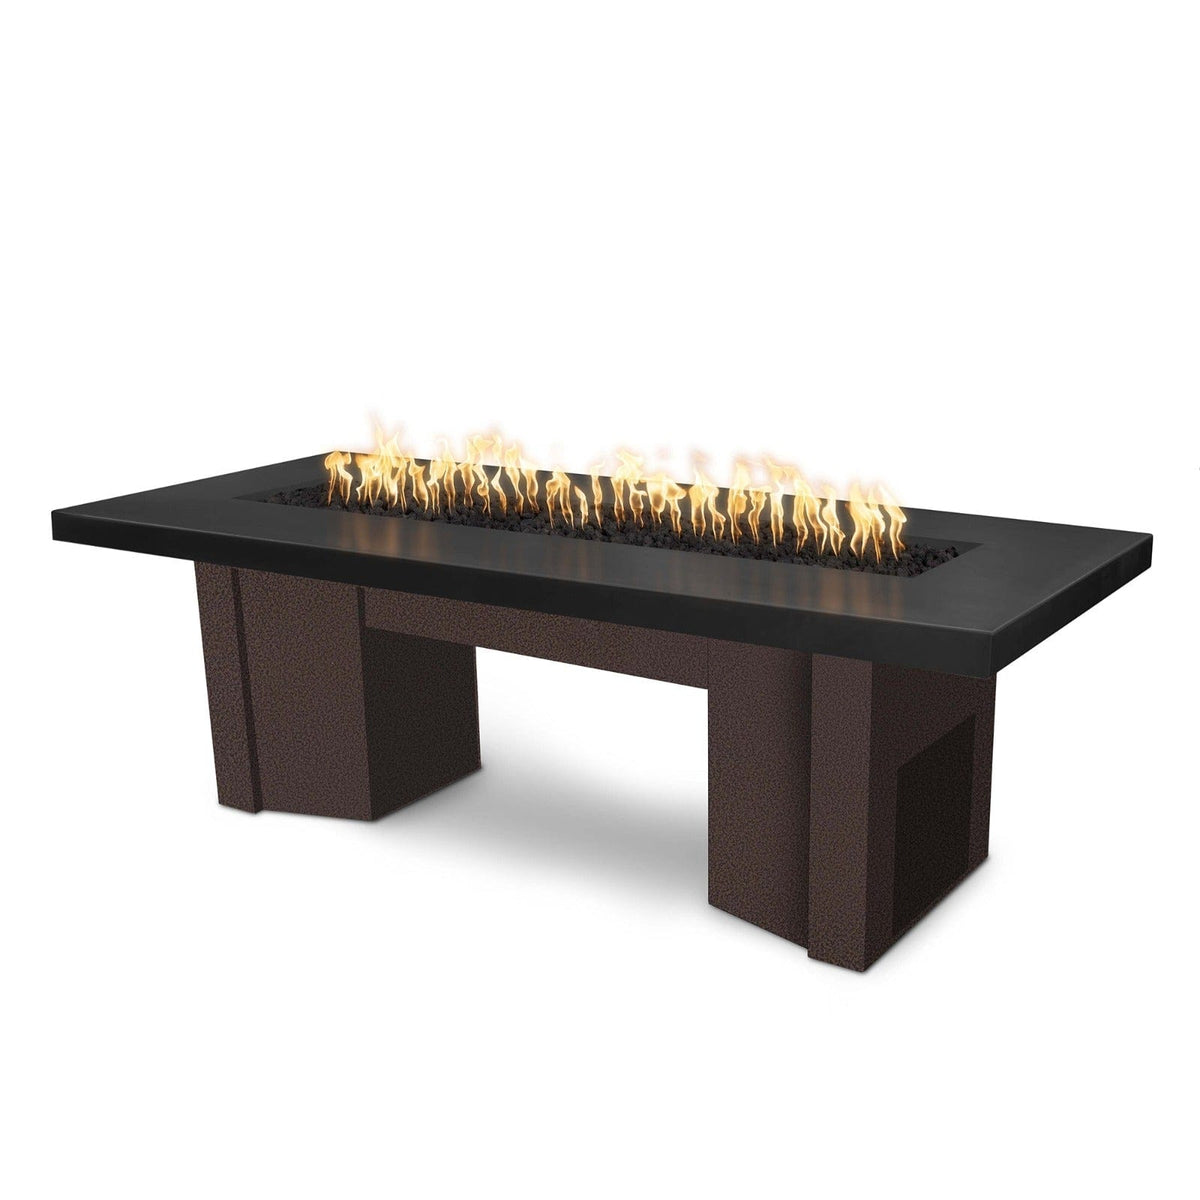 The Outdoor Plus Fire Features Black (-BLK) / Copper Vein Powder Coated Steel (-CPV) The Outdoor Plus 78&quot; Alameda Fire Table Smooth Concrete in Natural Gas - 110V Plug &amp; Play Electronic Ignition / OPT-ALMGFRC78EKIT-NG